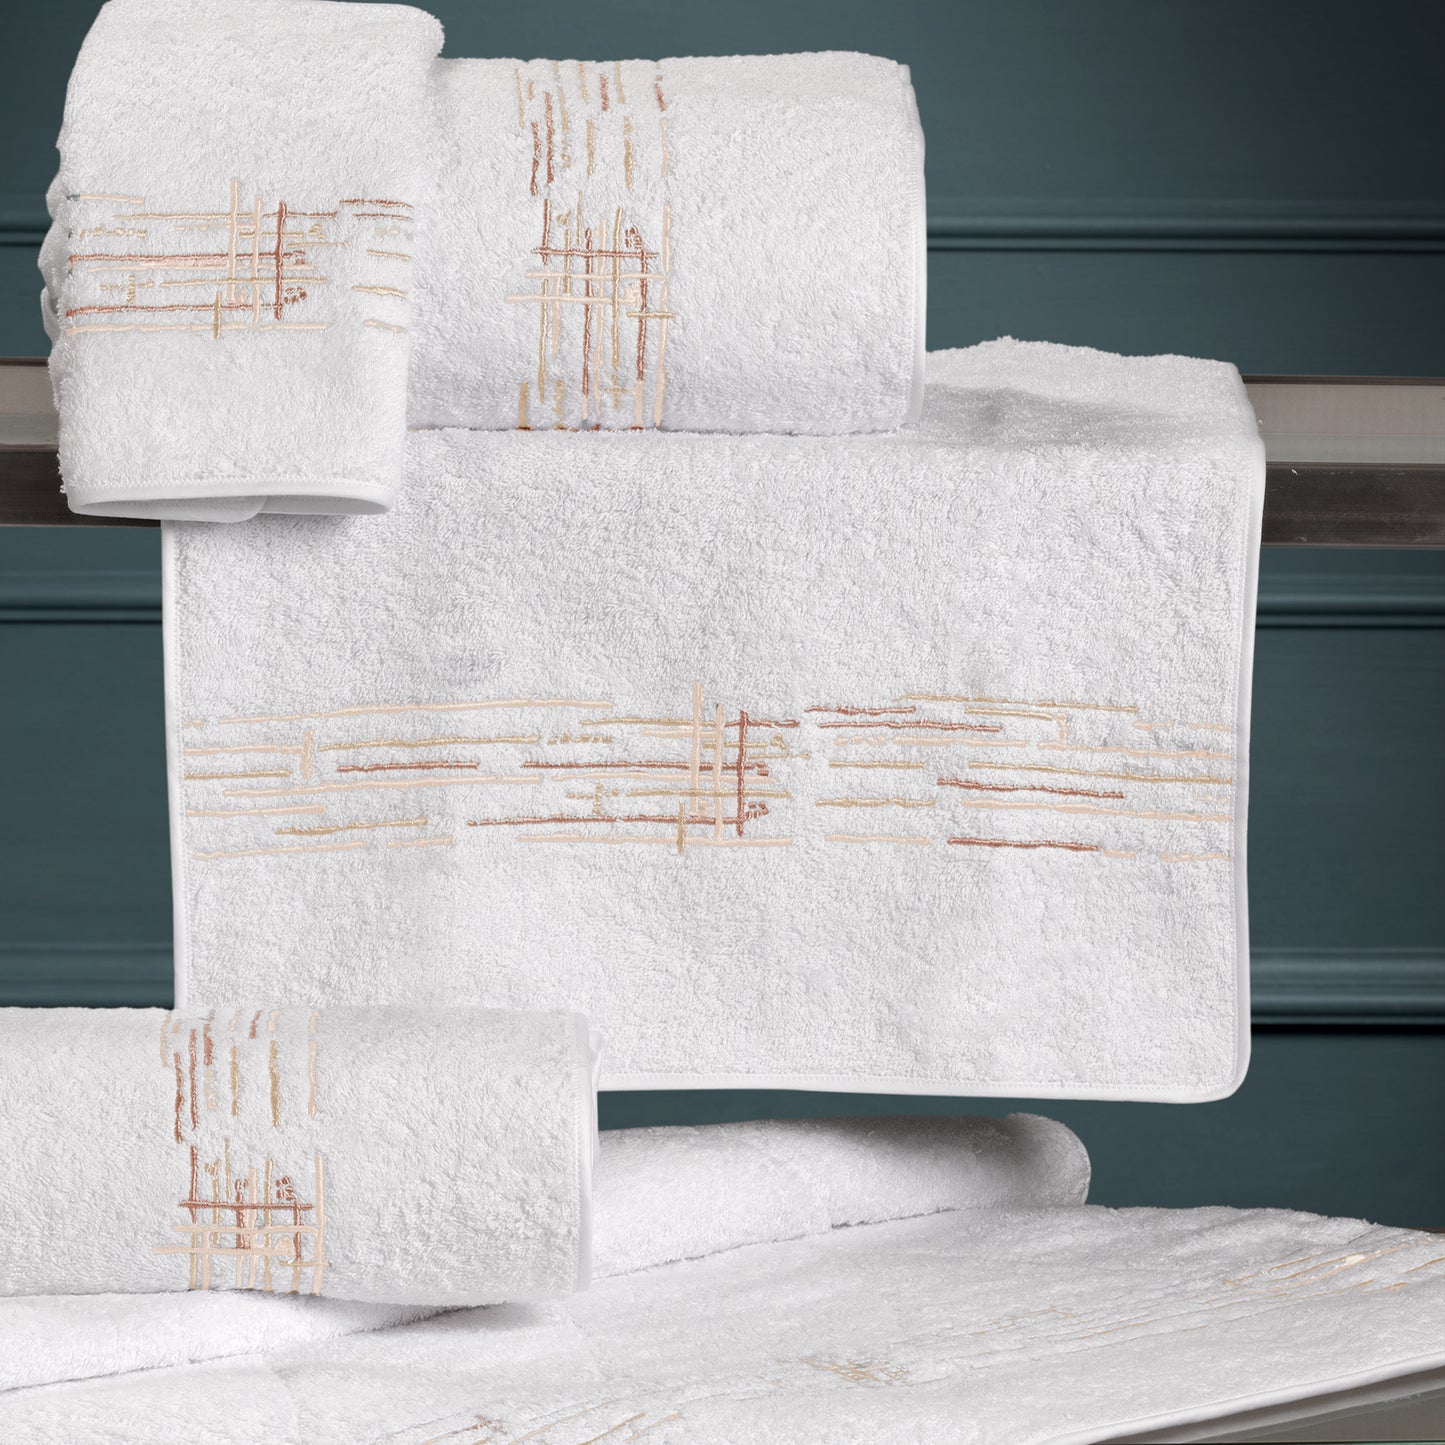 Pair of Terry Cotton Towels with Embroidered - Graffiti